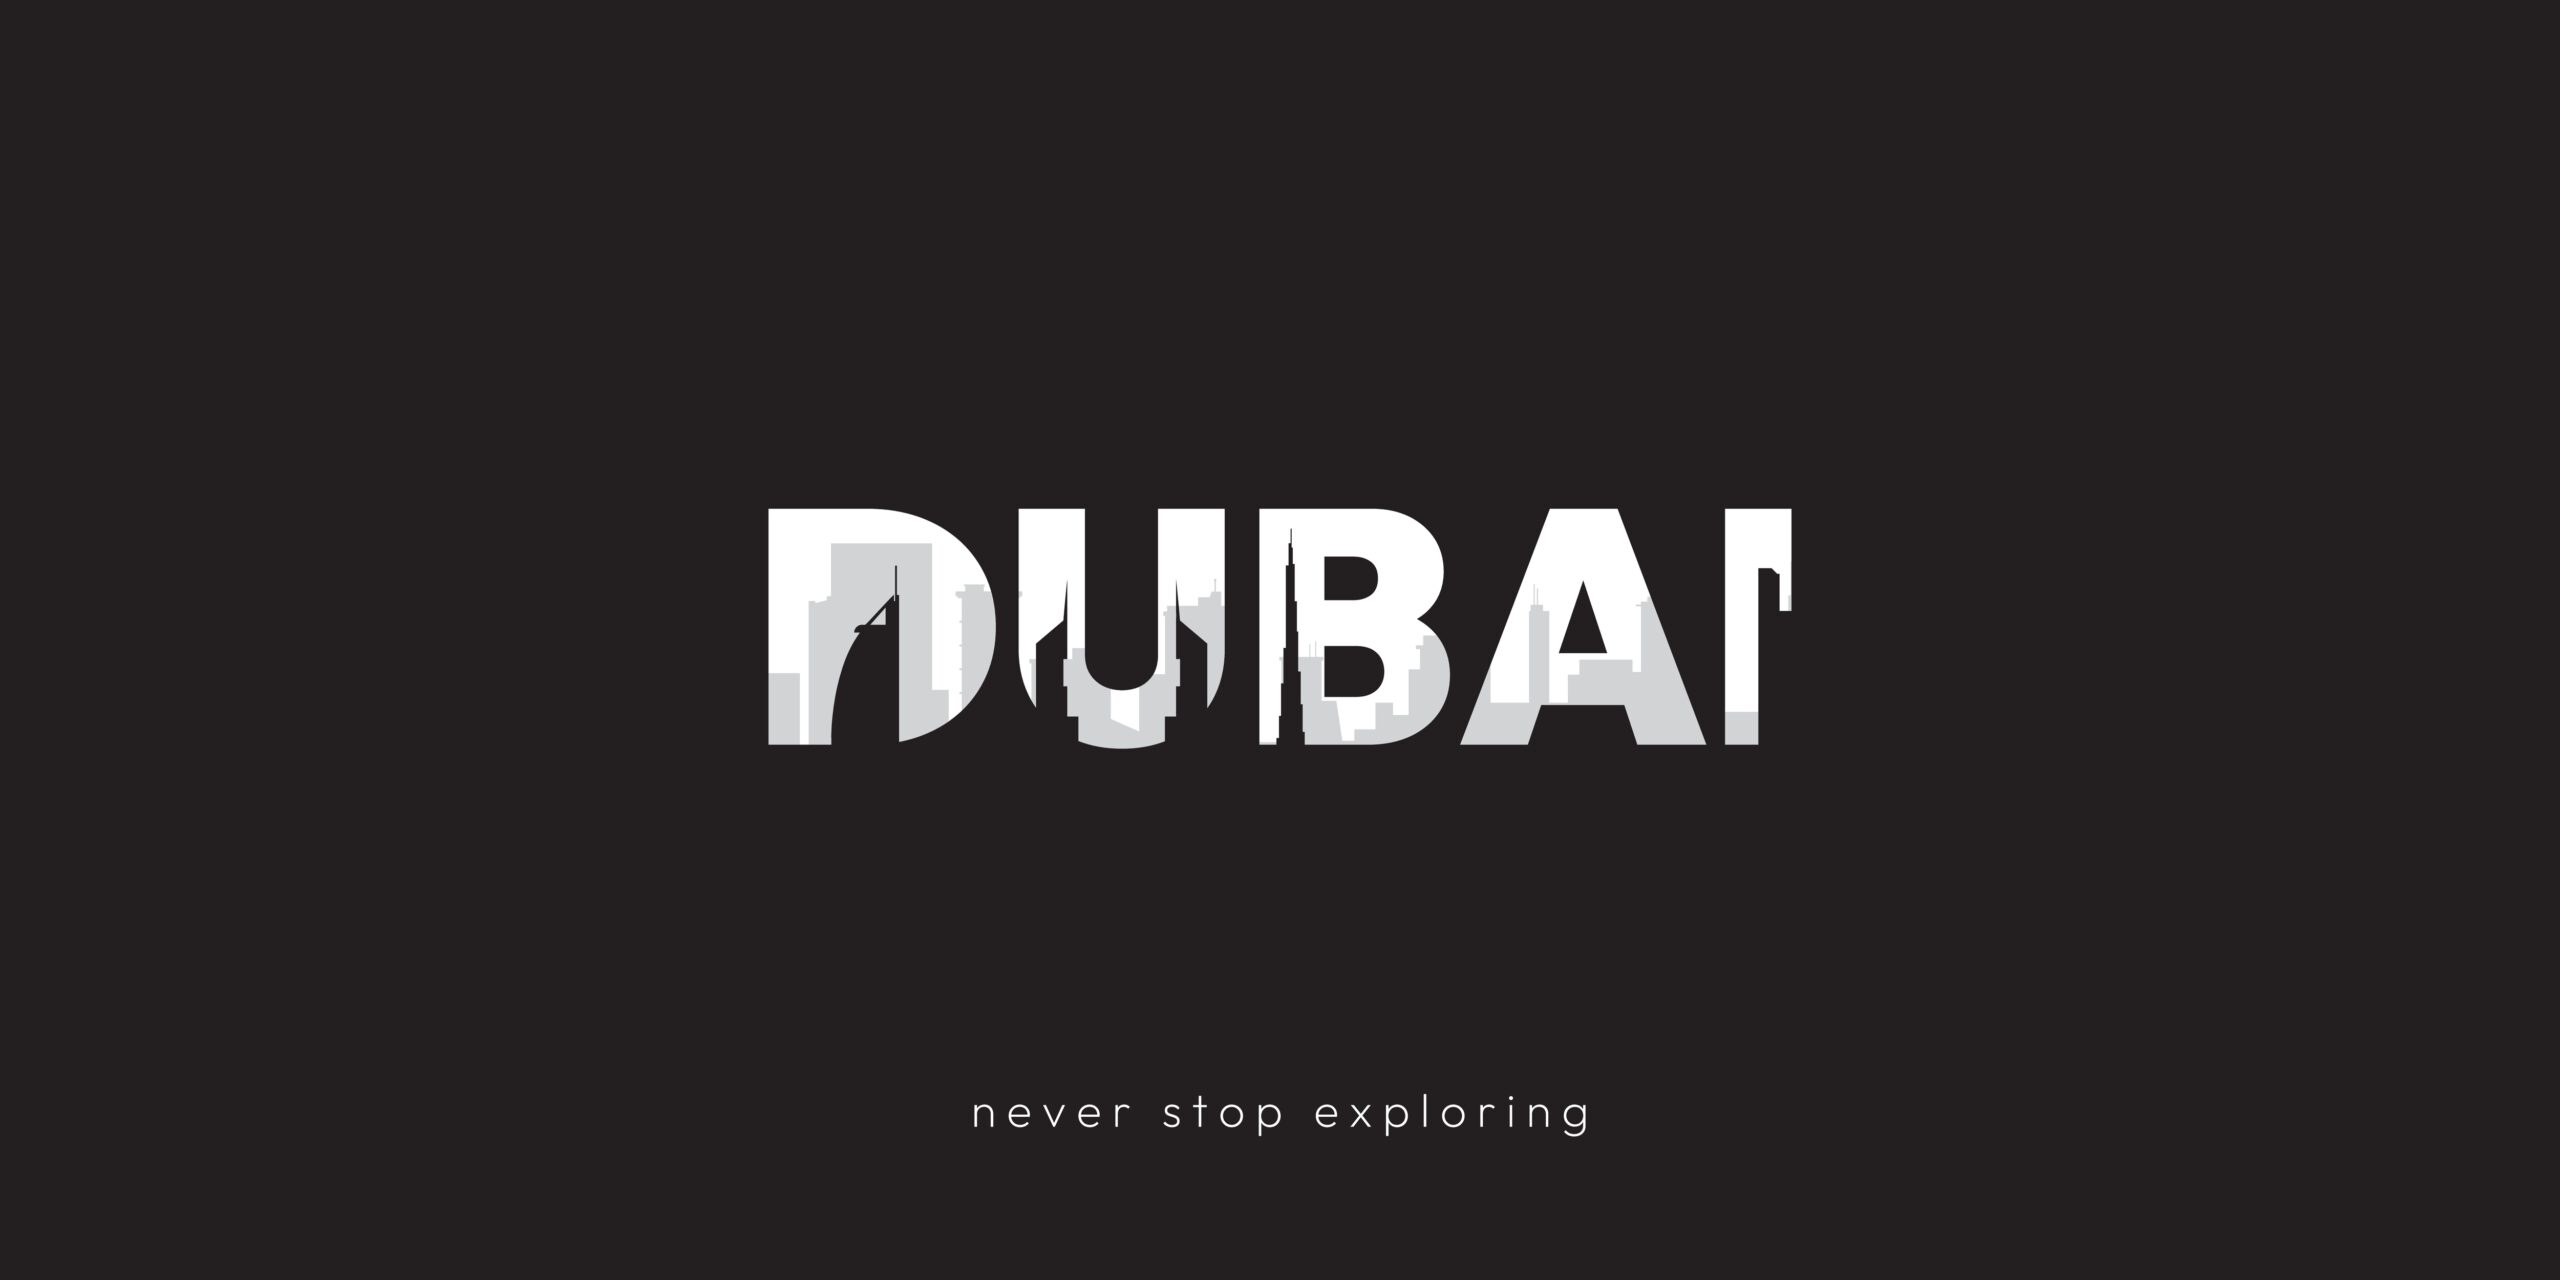 Local time in Dubai - Time to travel